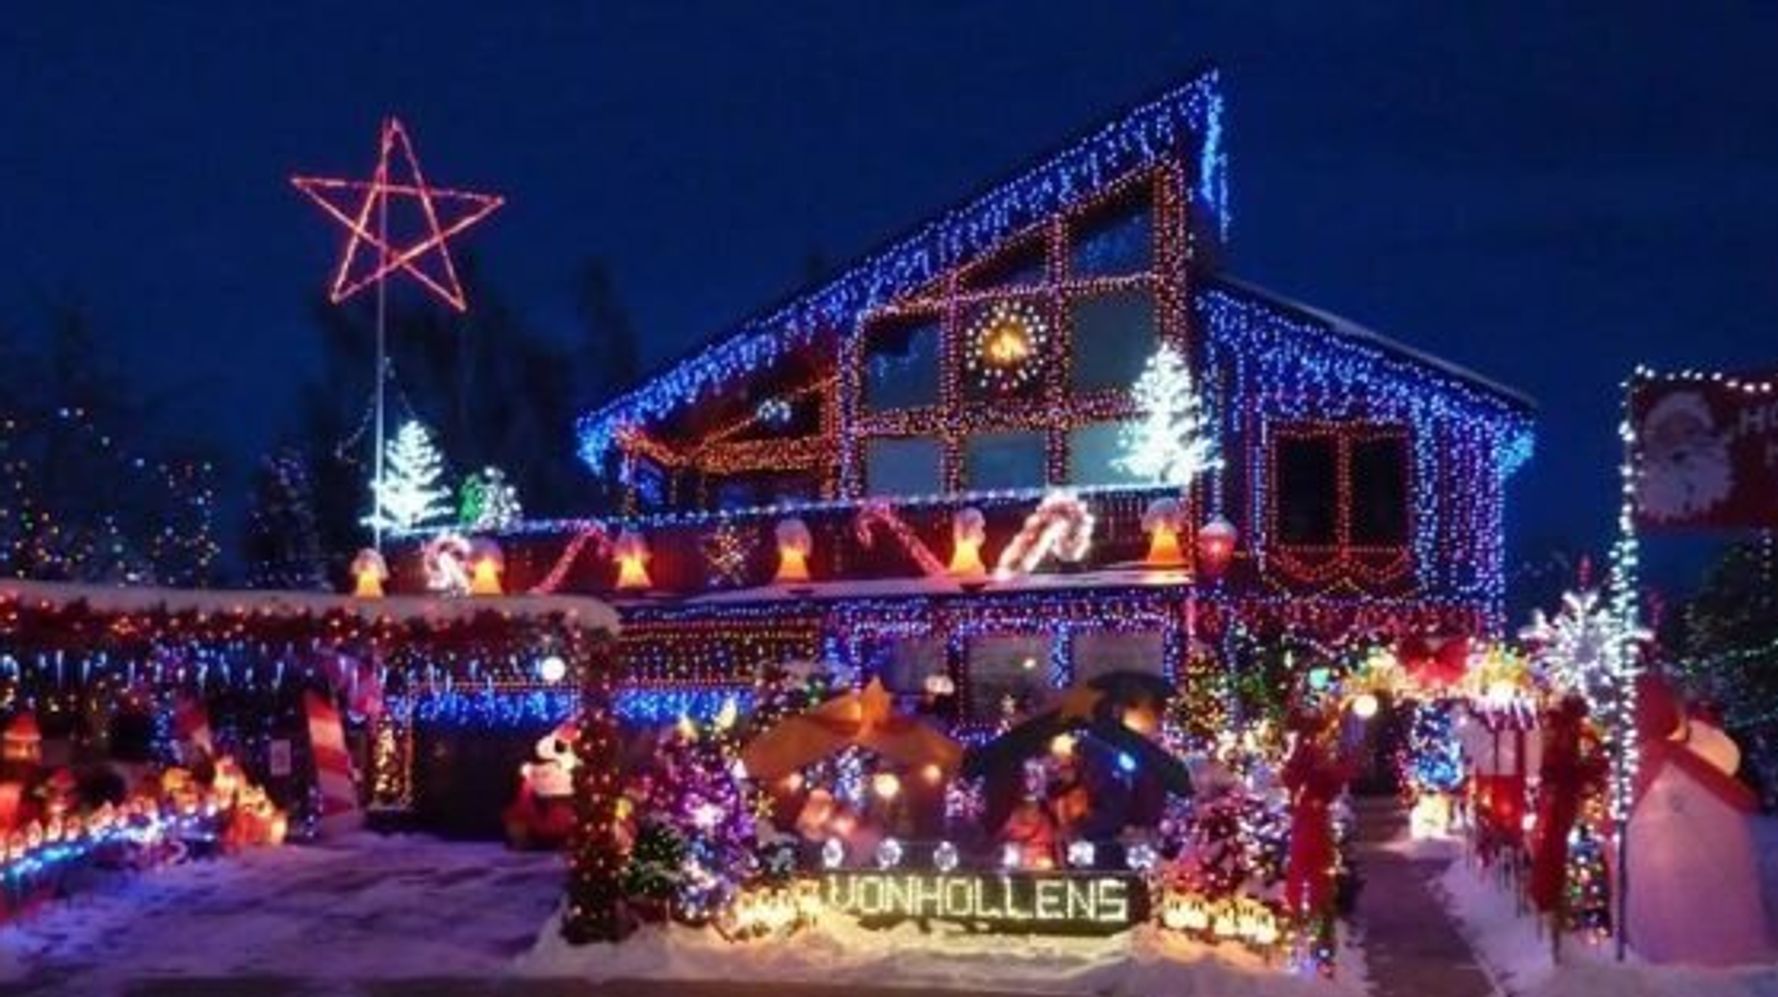 Rocky Mountain House Christmas Light Display To Shine For The Last Time